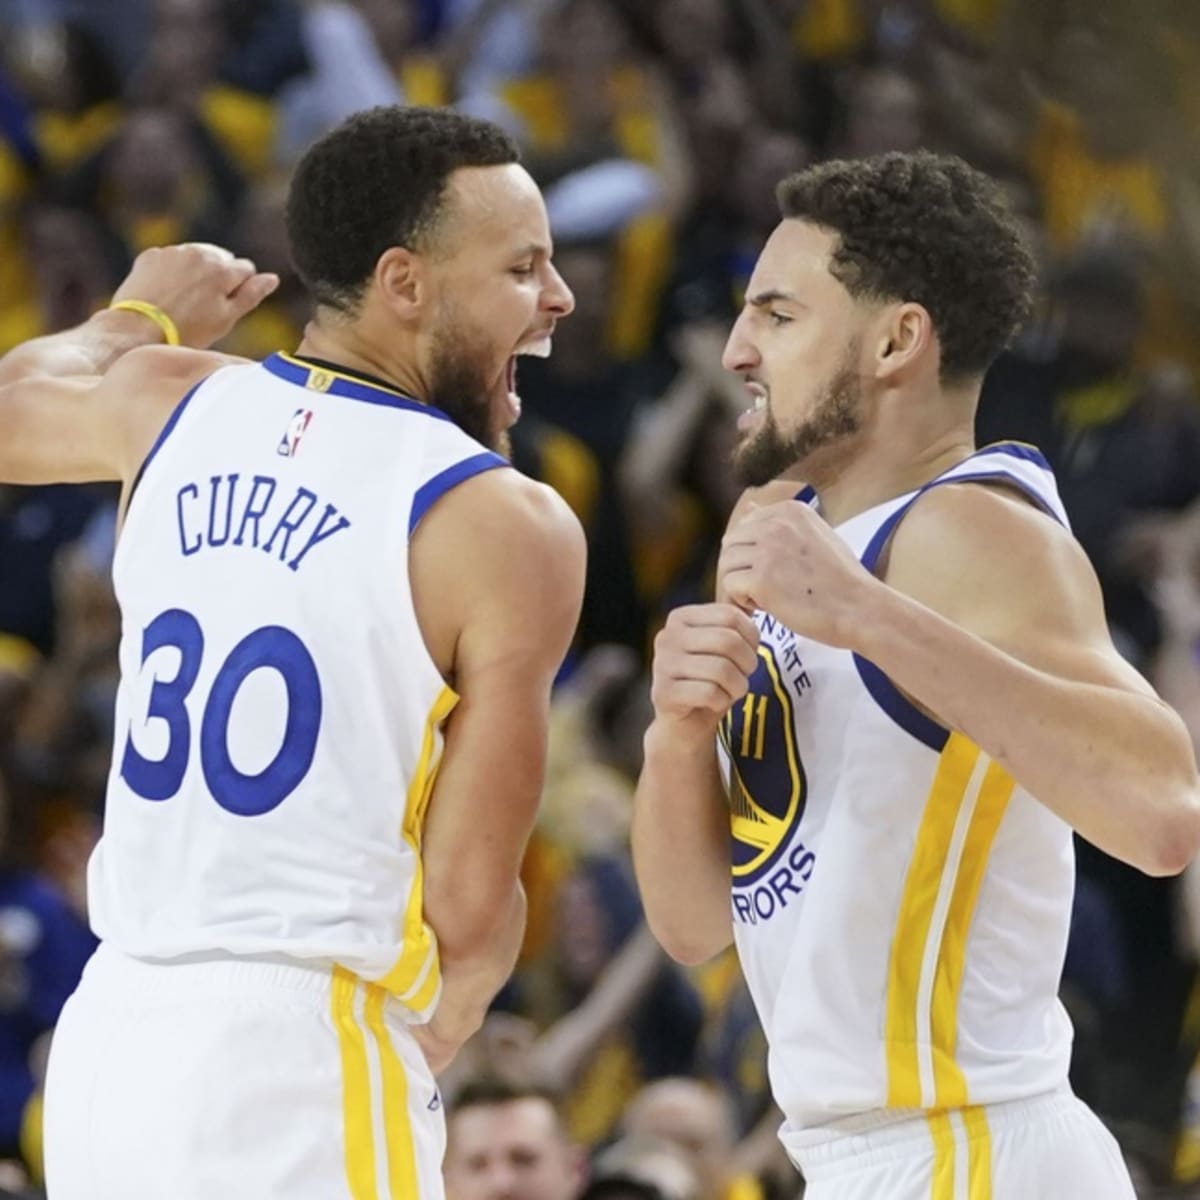 Check Out The Awesome Photo Of Steph Curry And Klay Thompson on FanNation